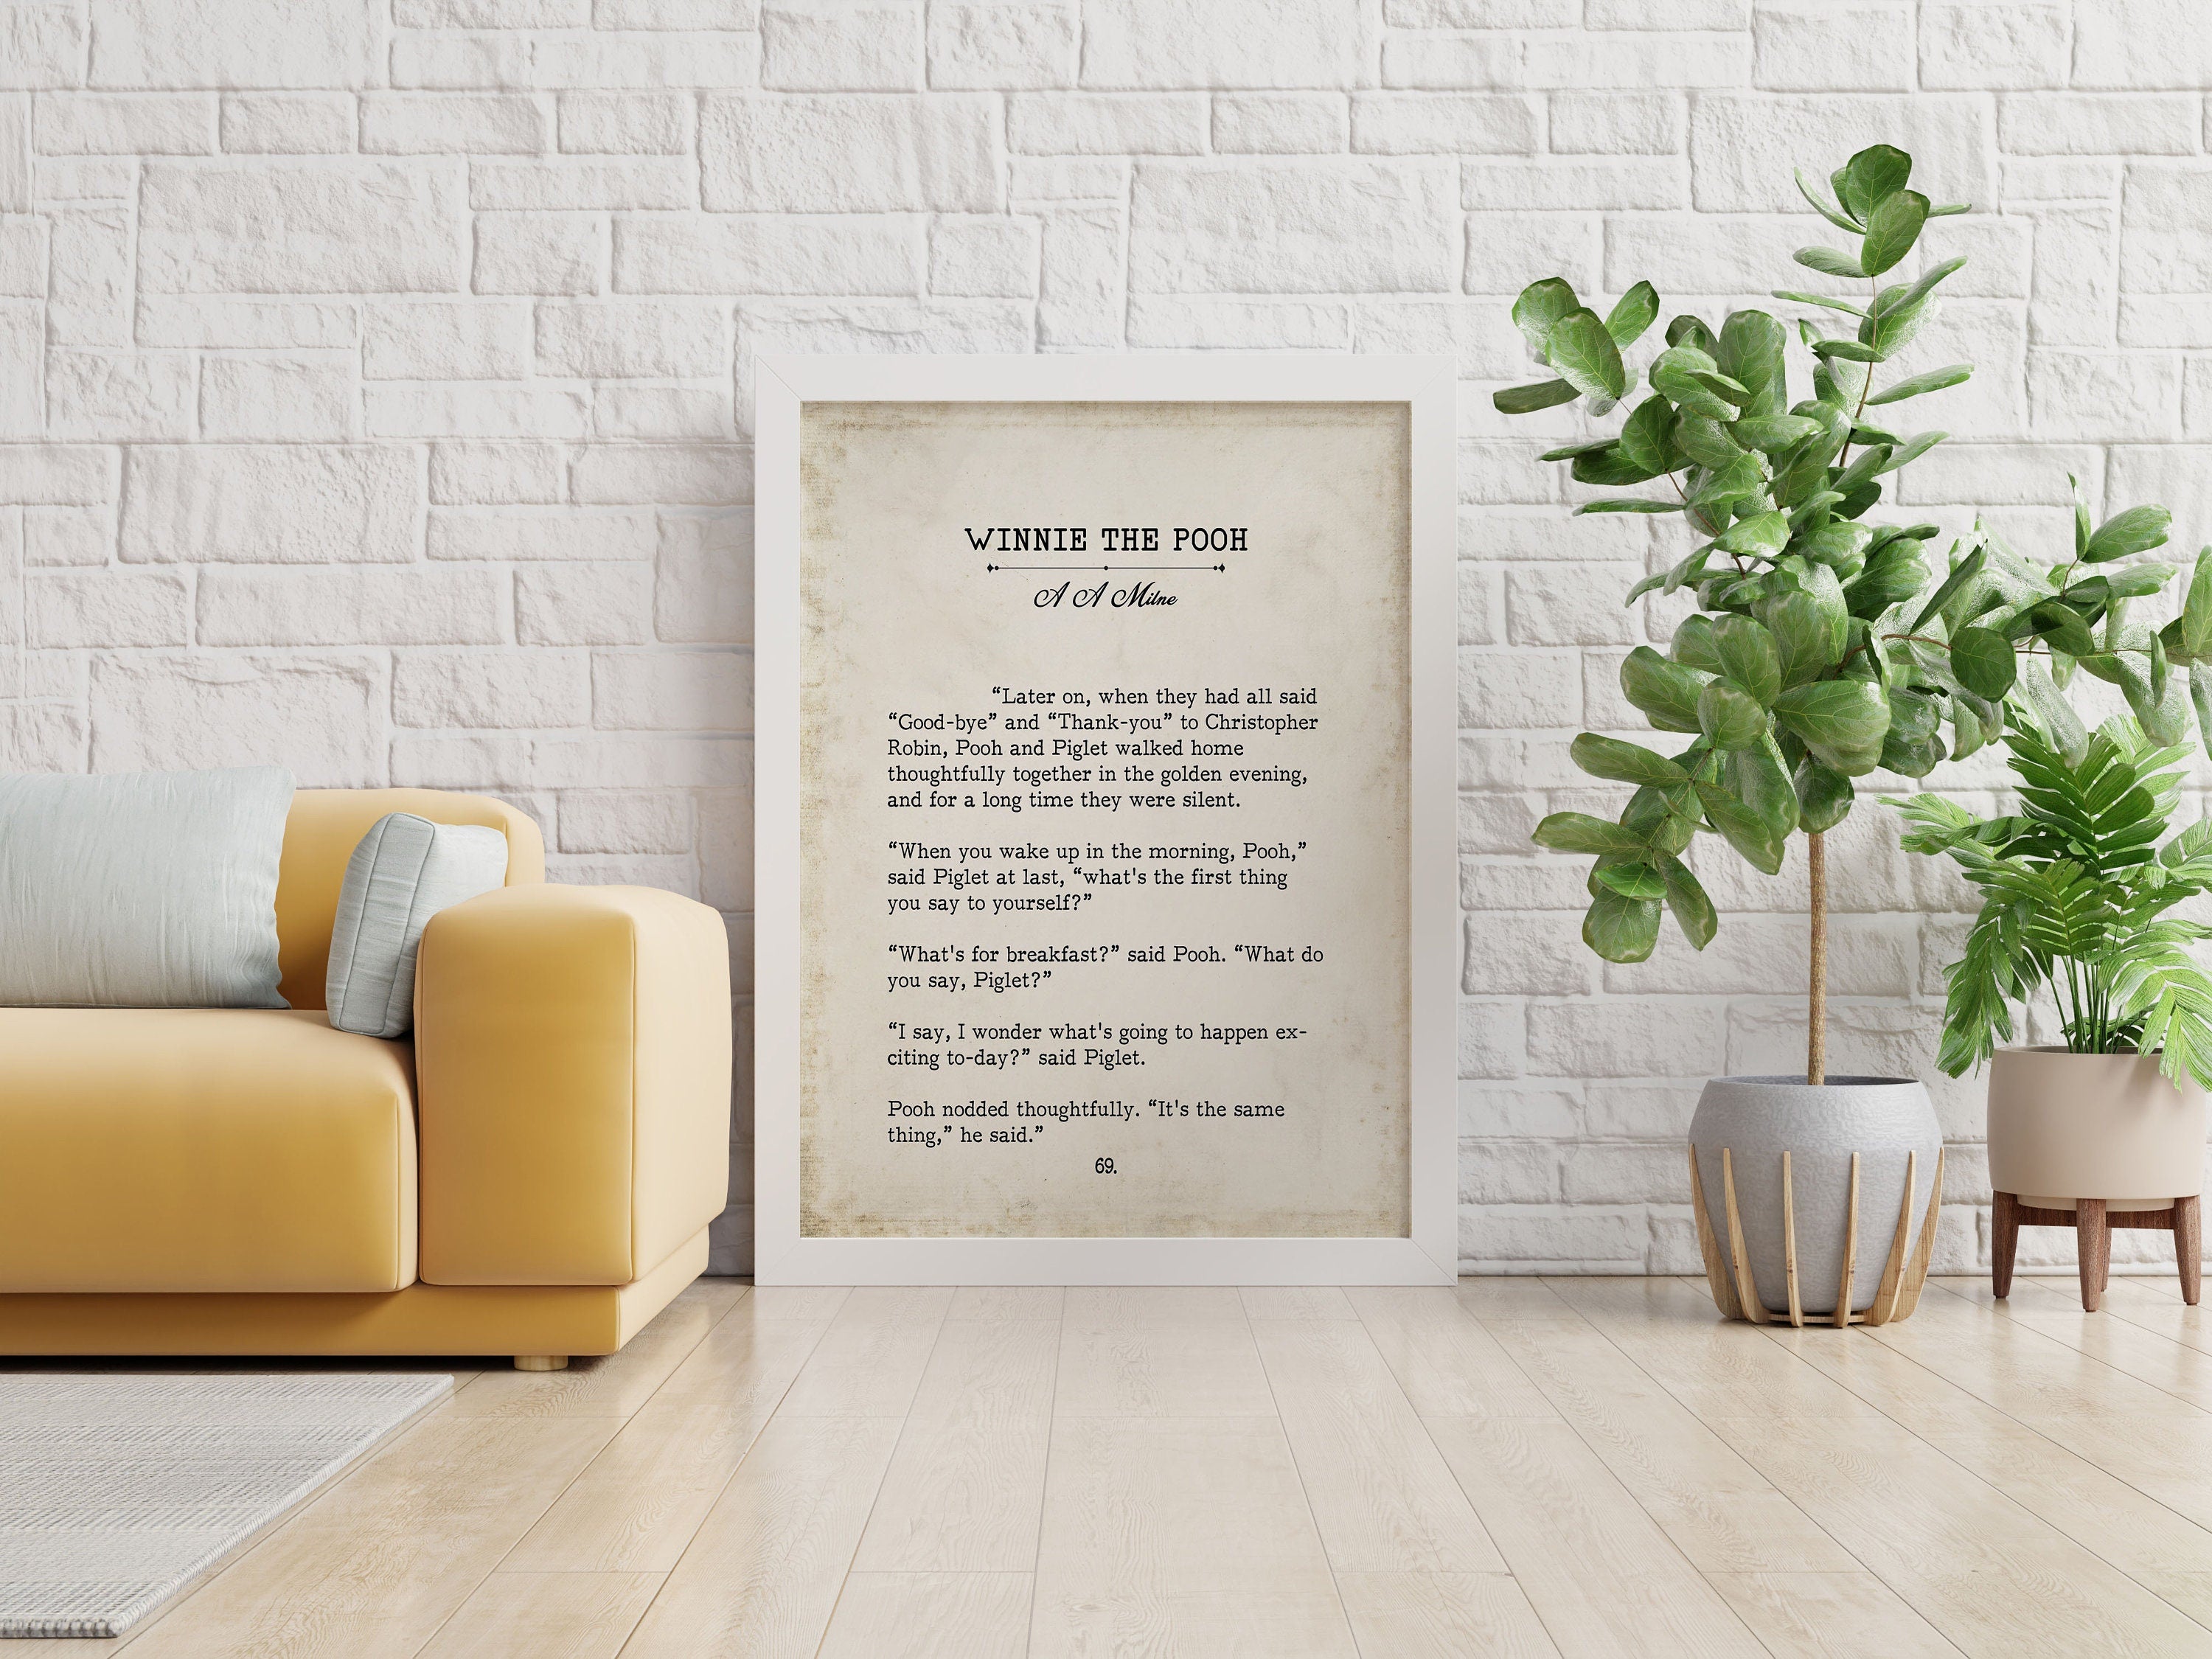 Winnie the Pooh Quote Book Page Inspirational Wall Art, A A Milne Vintage Style Print Decor